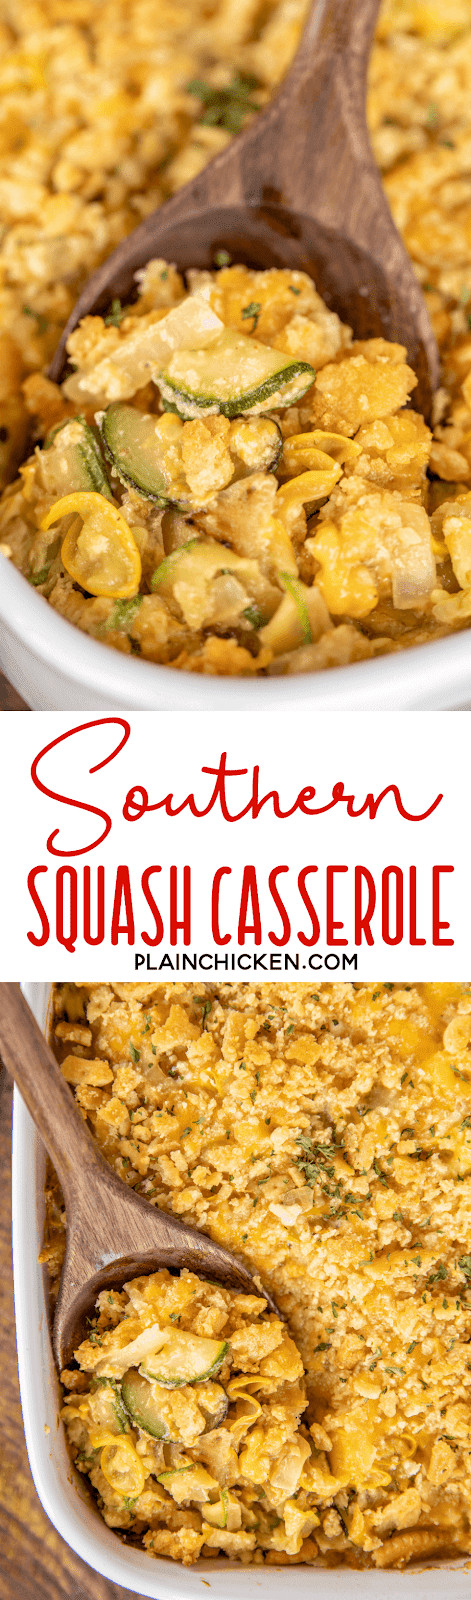 Squash Casserole With Ritz Crackers Luxury Southern Squash Casserole Of Squash Casserole With Ritz Crackers 